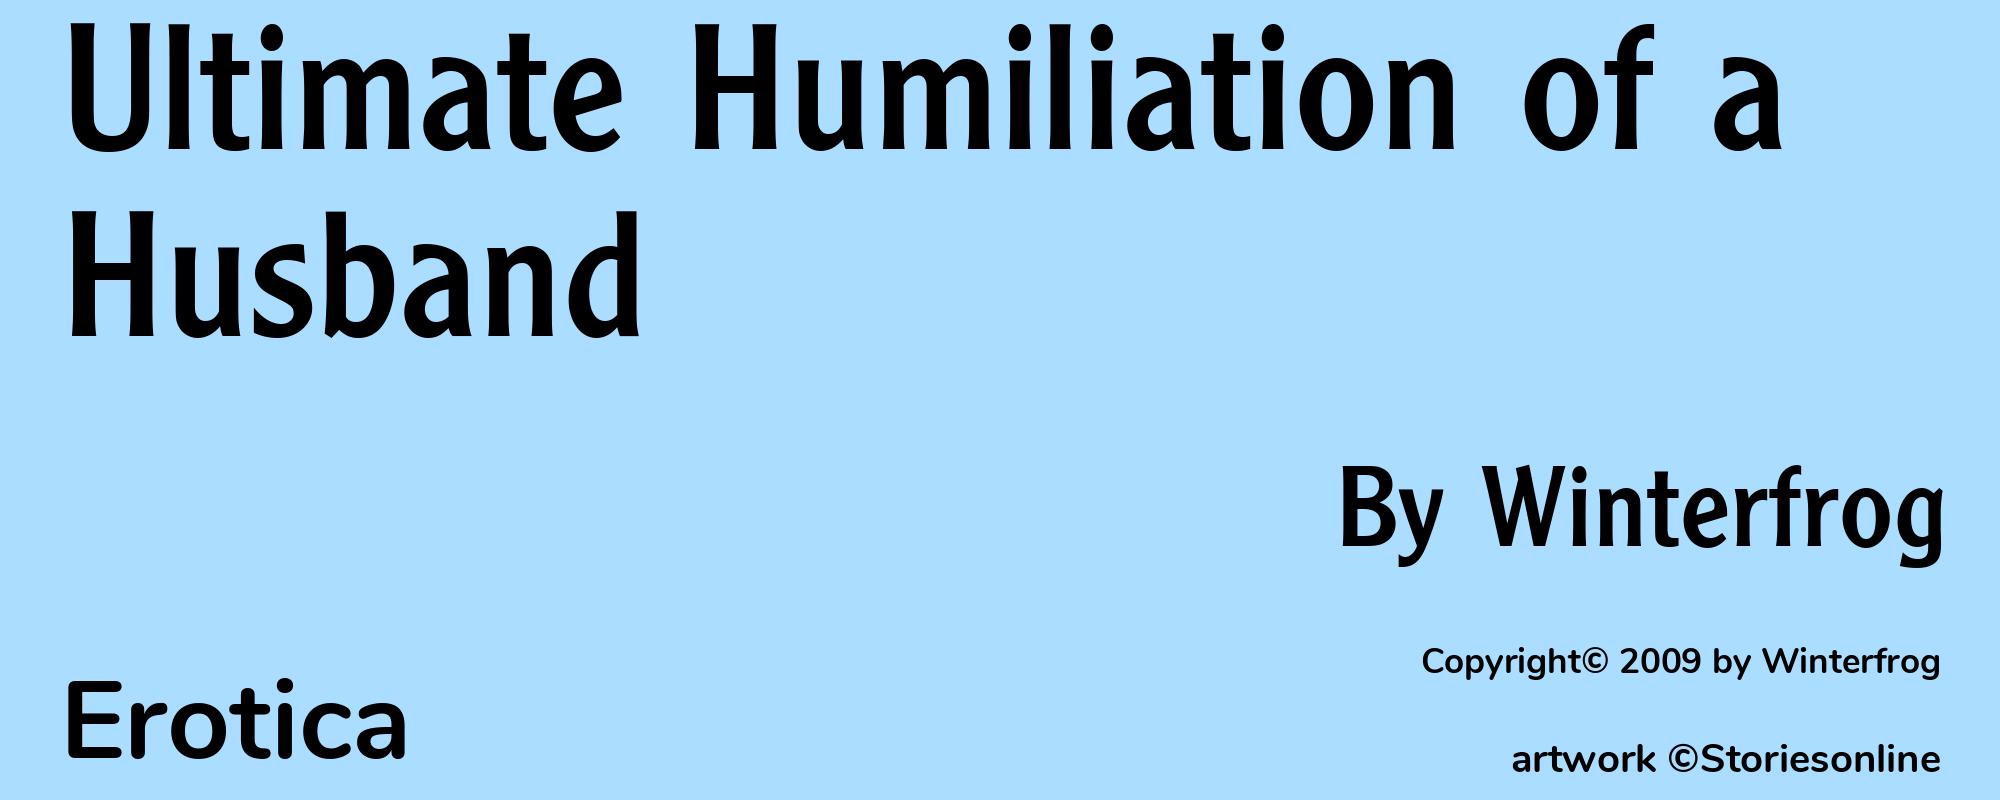 Ultimate Humiliation of a Husband - Cover